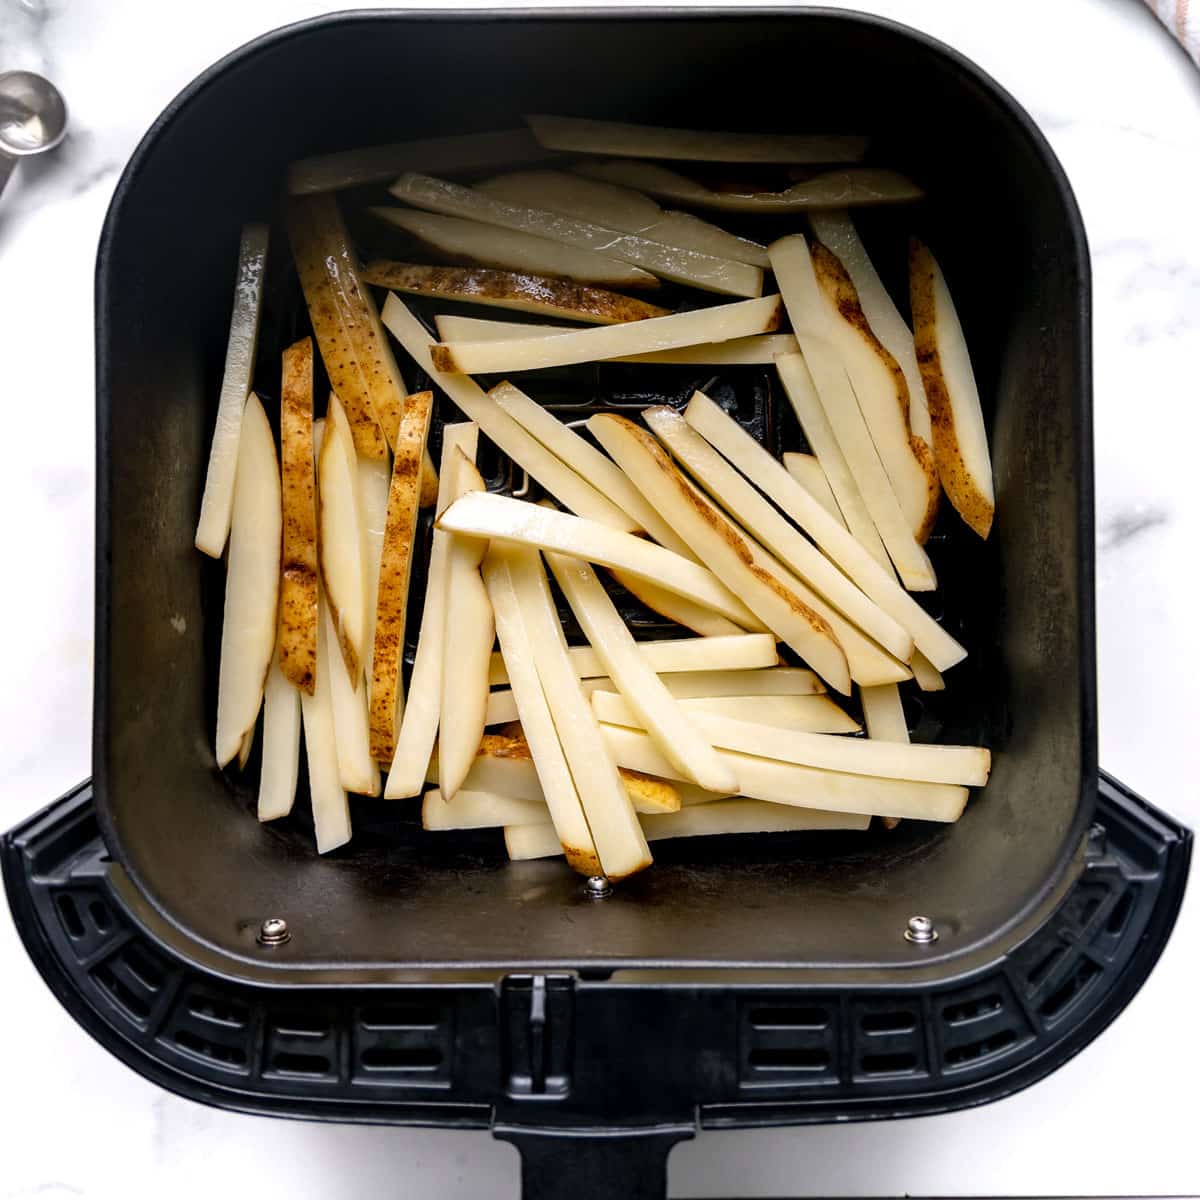 French fries in an air fryer basket.